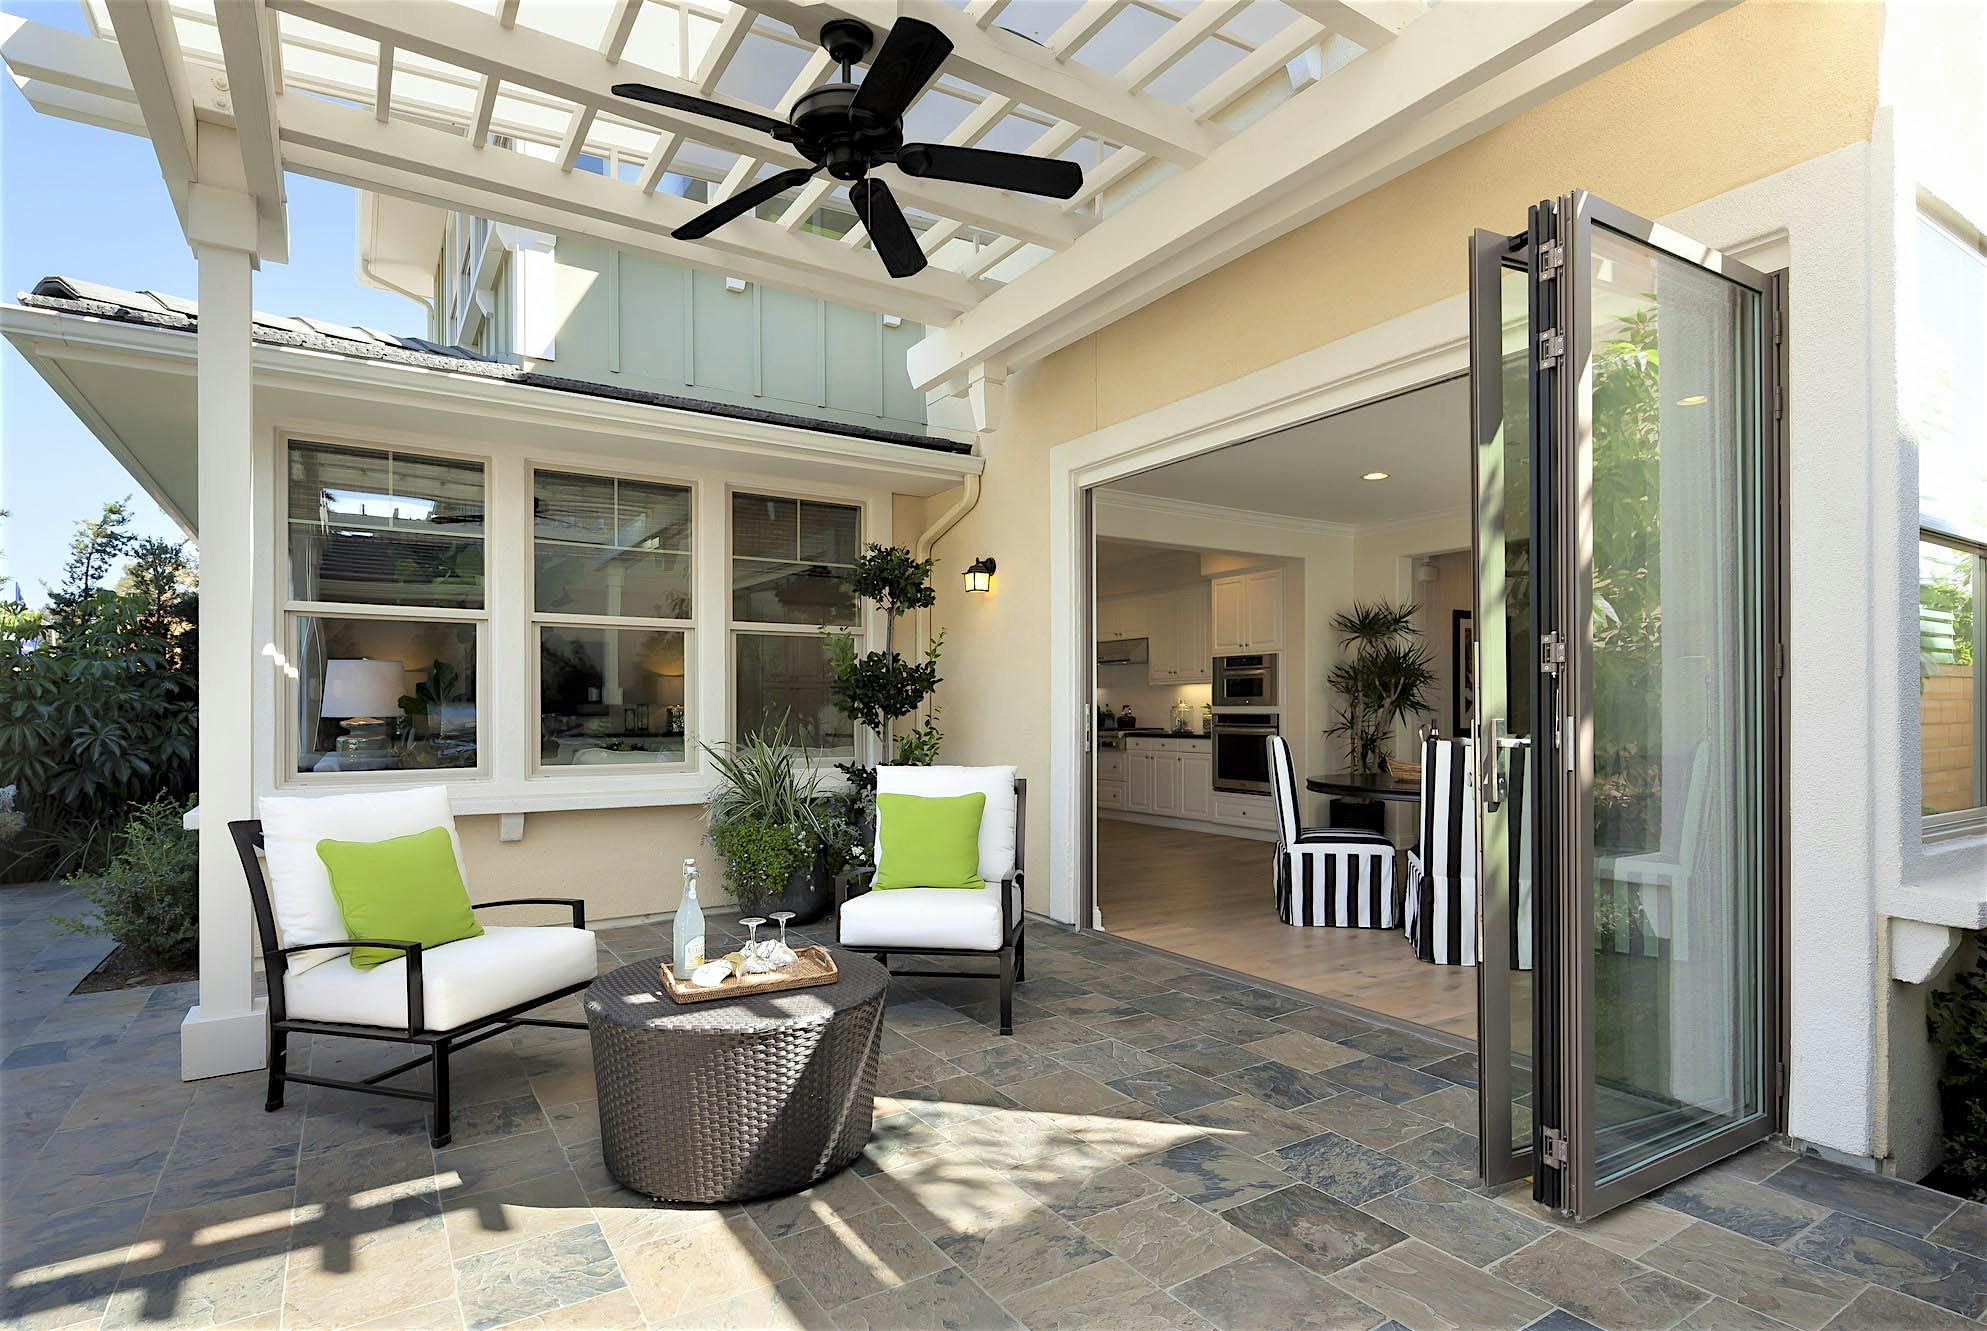 replacing traditional patio doors with folding glass walls